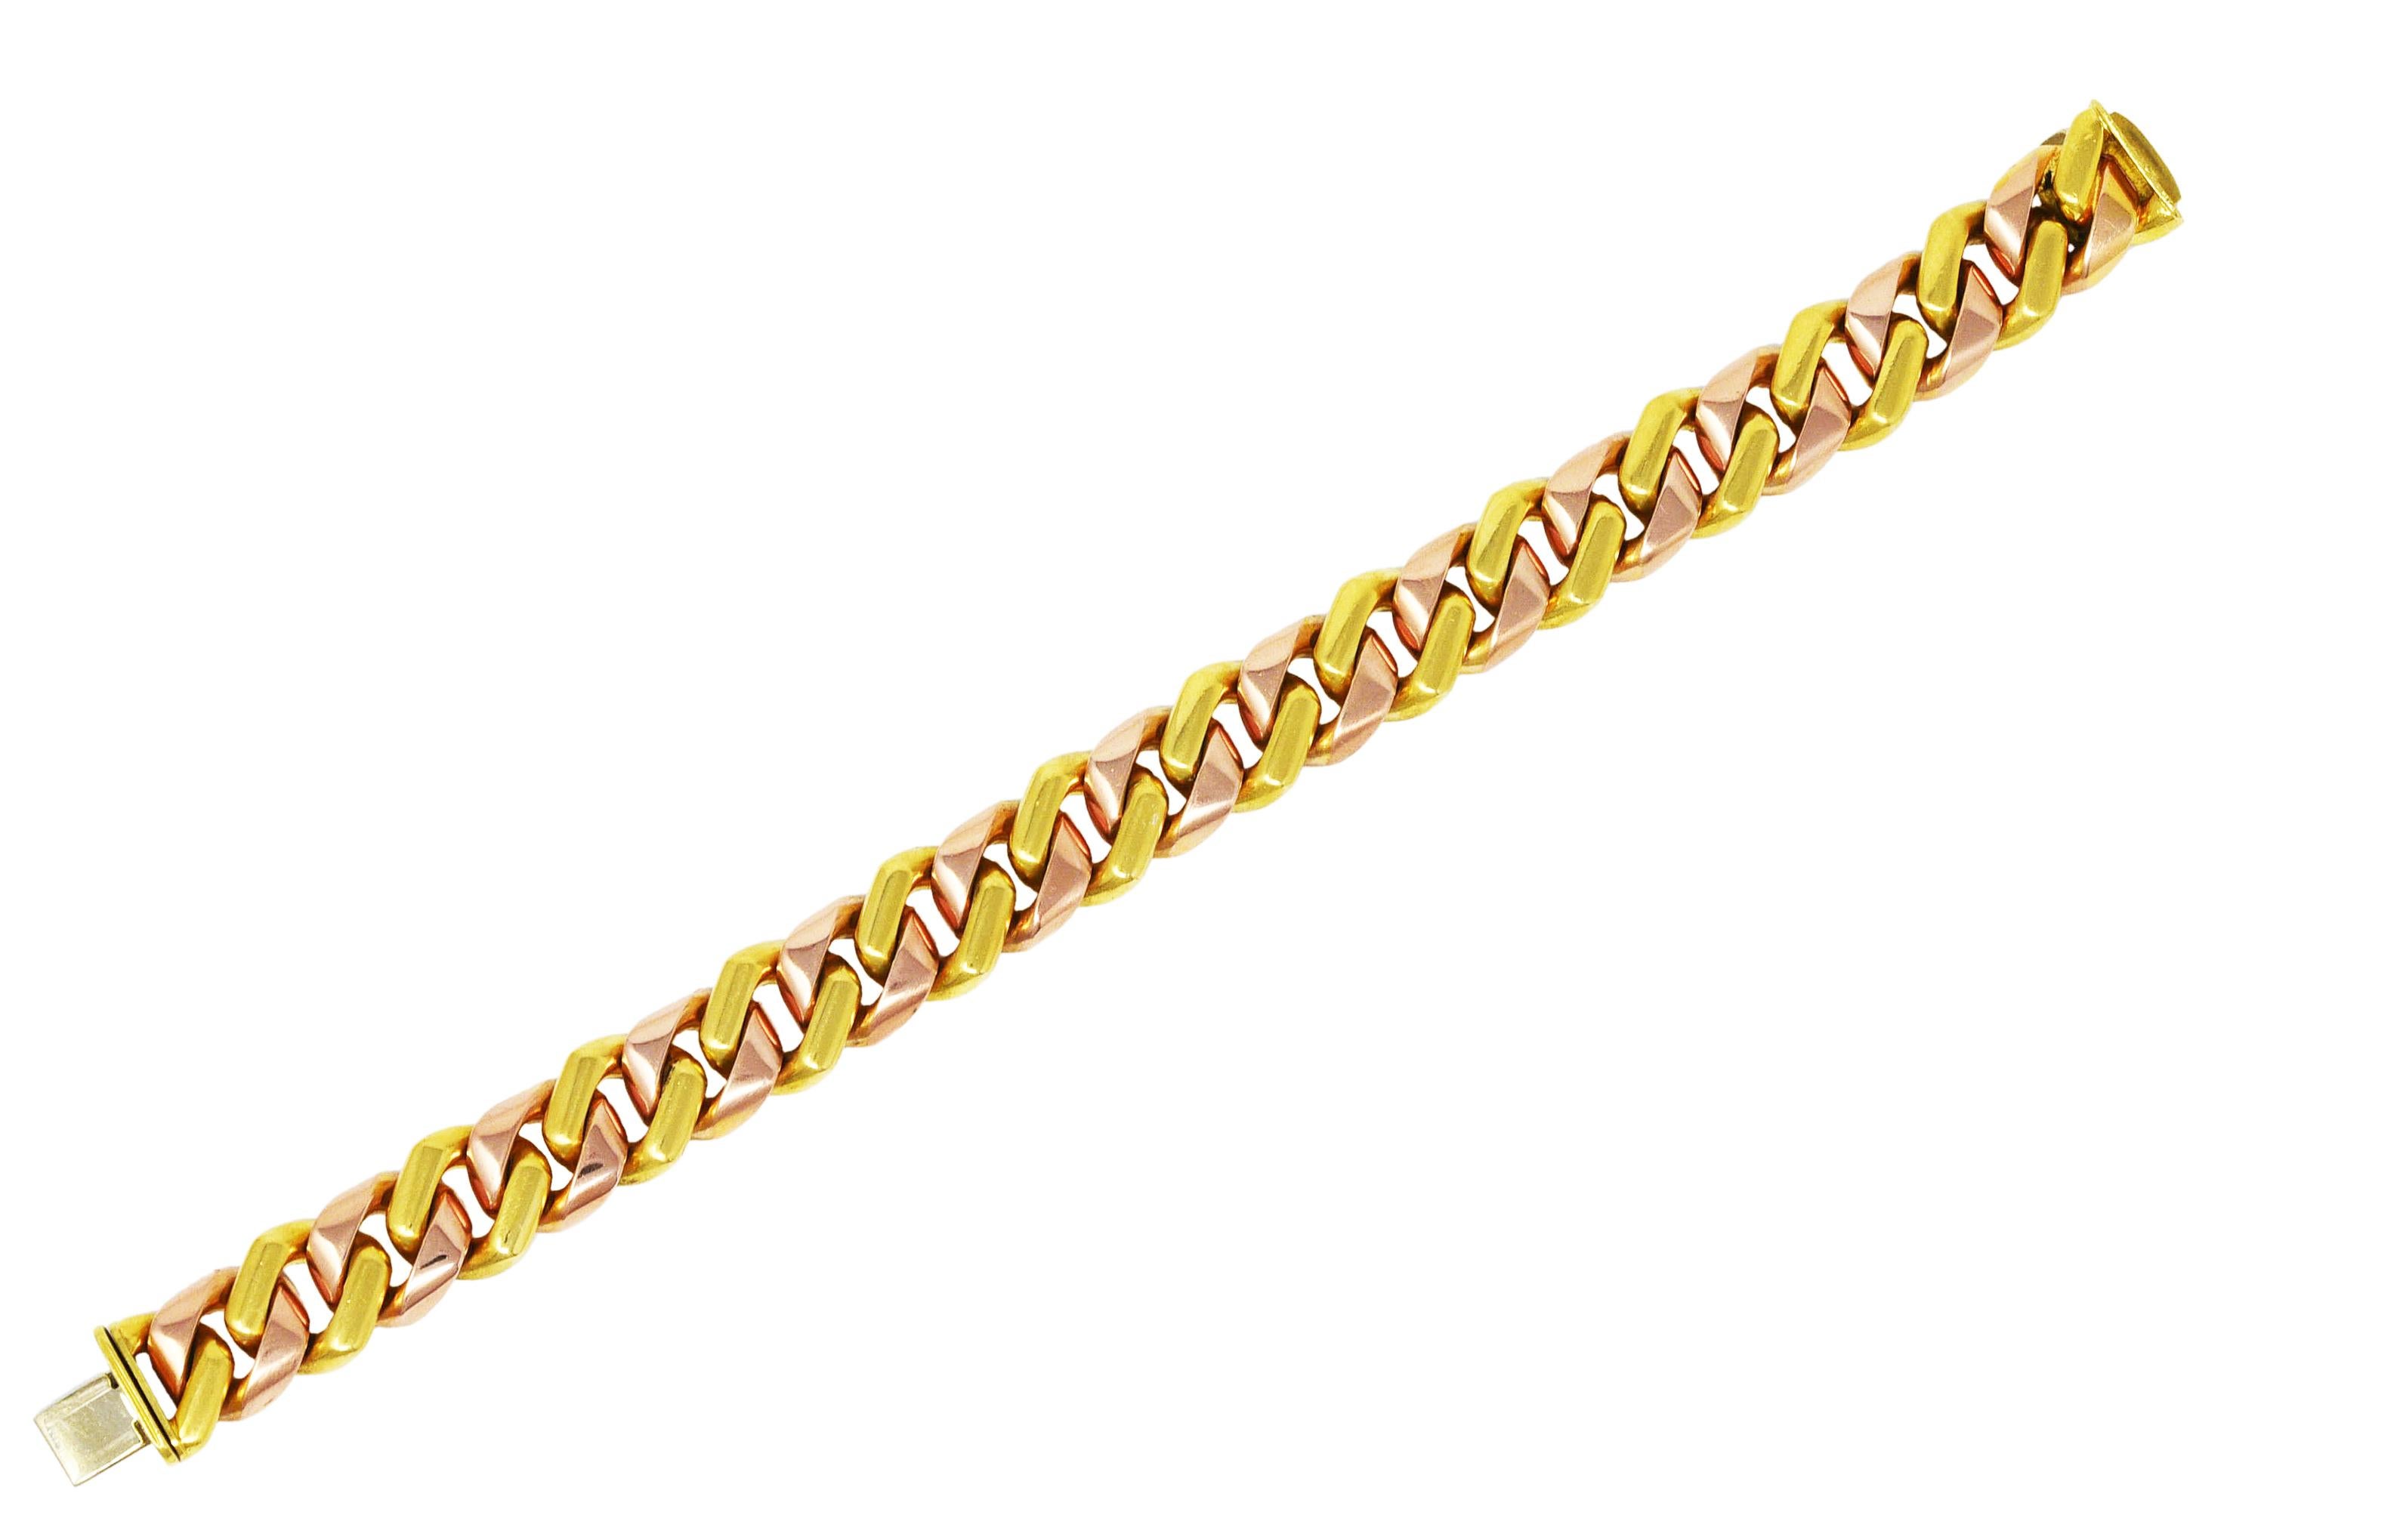 Bracelet is designed as curb link chain with alternating rose and yellow gold links. Completed by hidden clasp with hinged safety. Stamped 750 for 18 karat gold. Fully signed with Italian assay marks for Bvlgari, Italy. Circa: 1980's. Bracelet size: